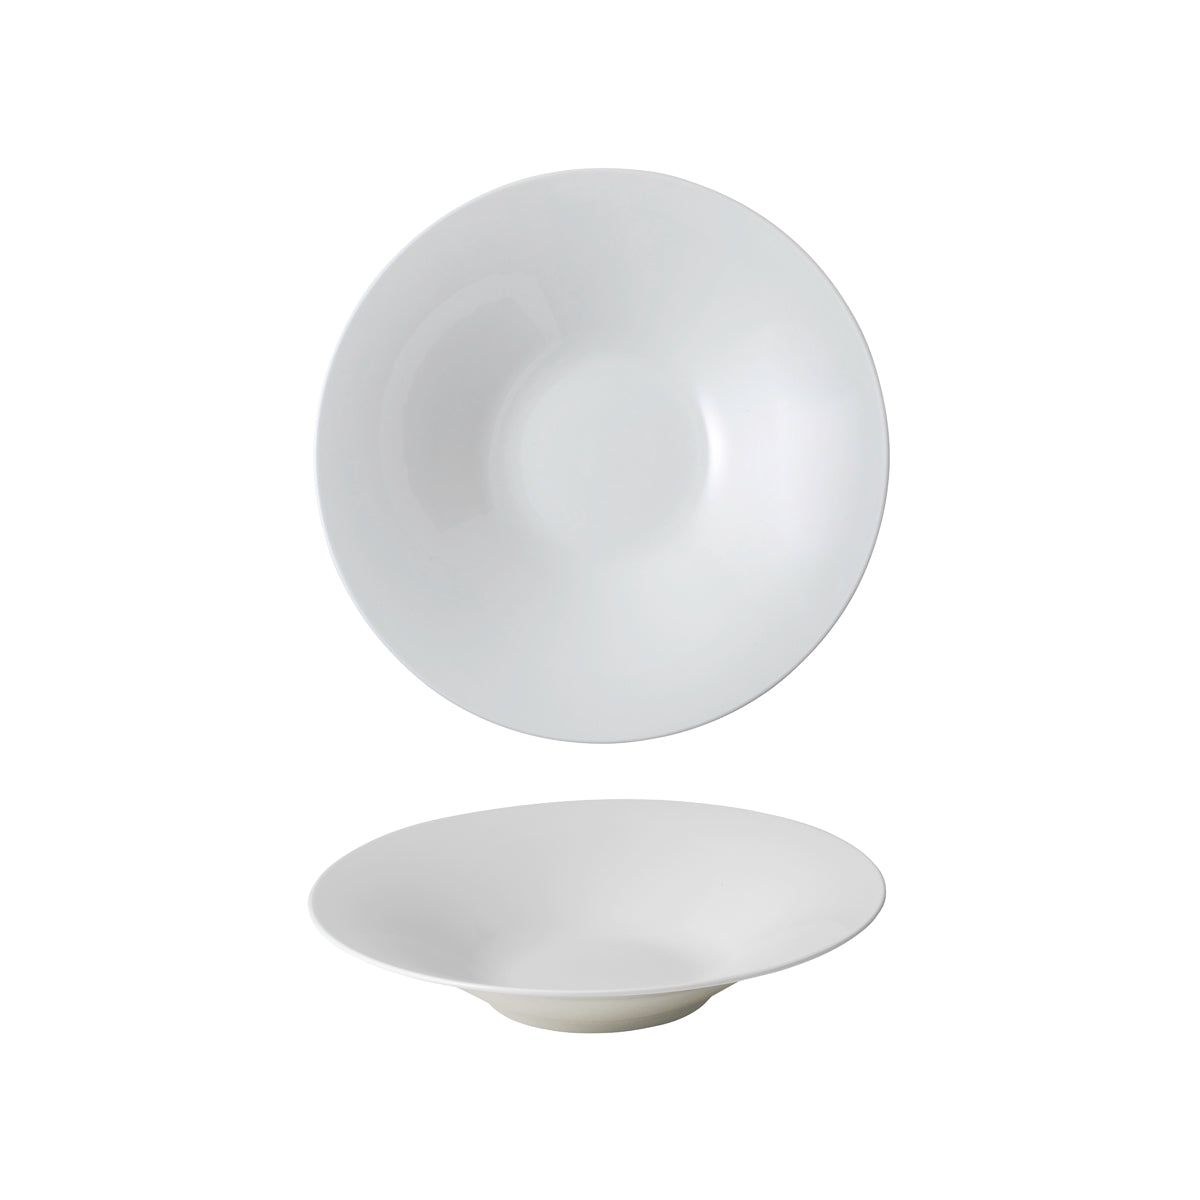 VB16-4090-2701 Villeroy And Boch Villeroy And Boch Stella Cosmo White Deep Coupe Plate 290x290x60mm / 1.2Lt Tomkin Australia Hospitality Supplies